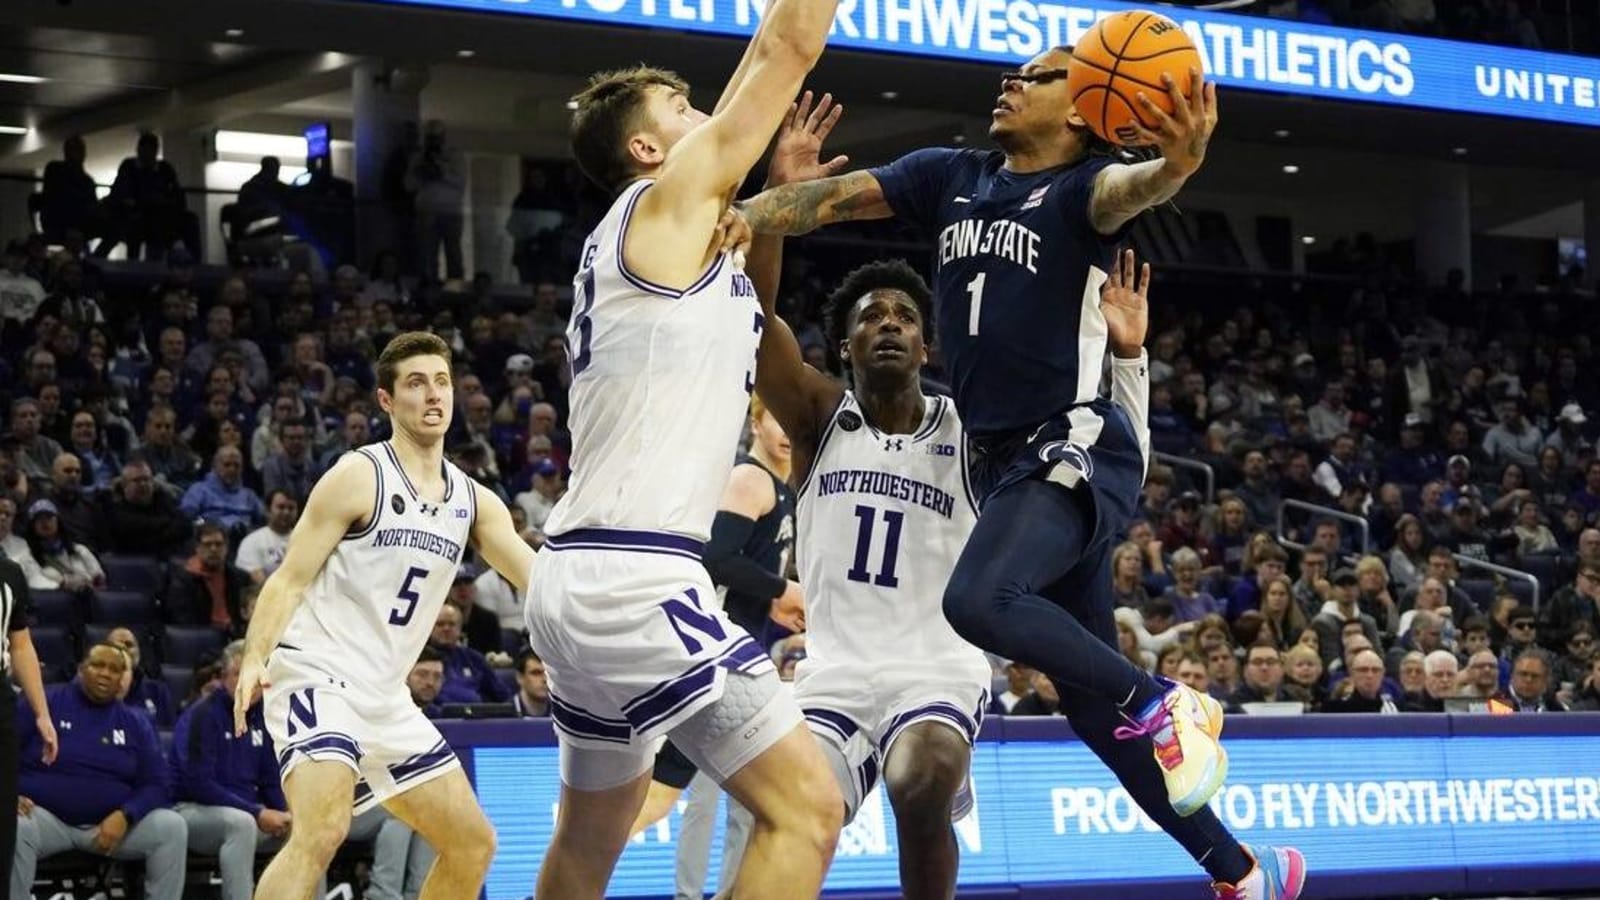 Northwestern continues home success, takes down Penn State